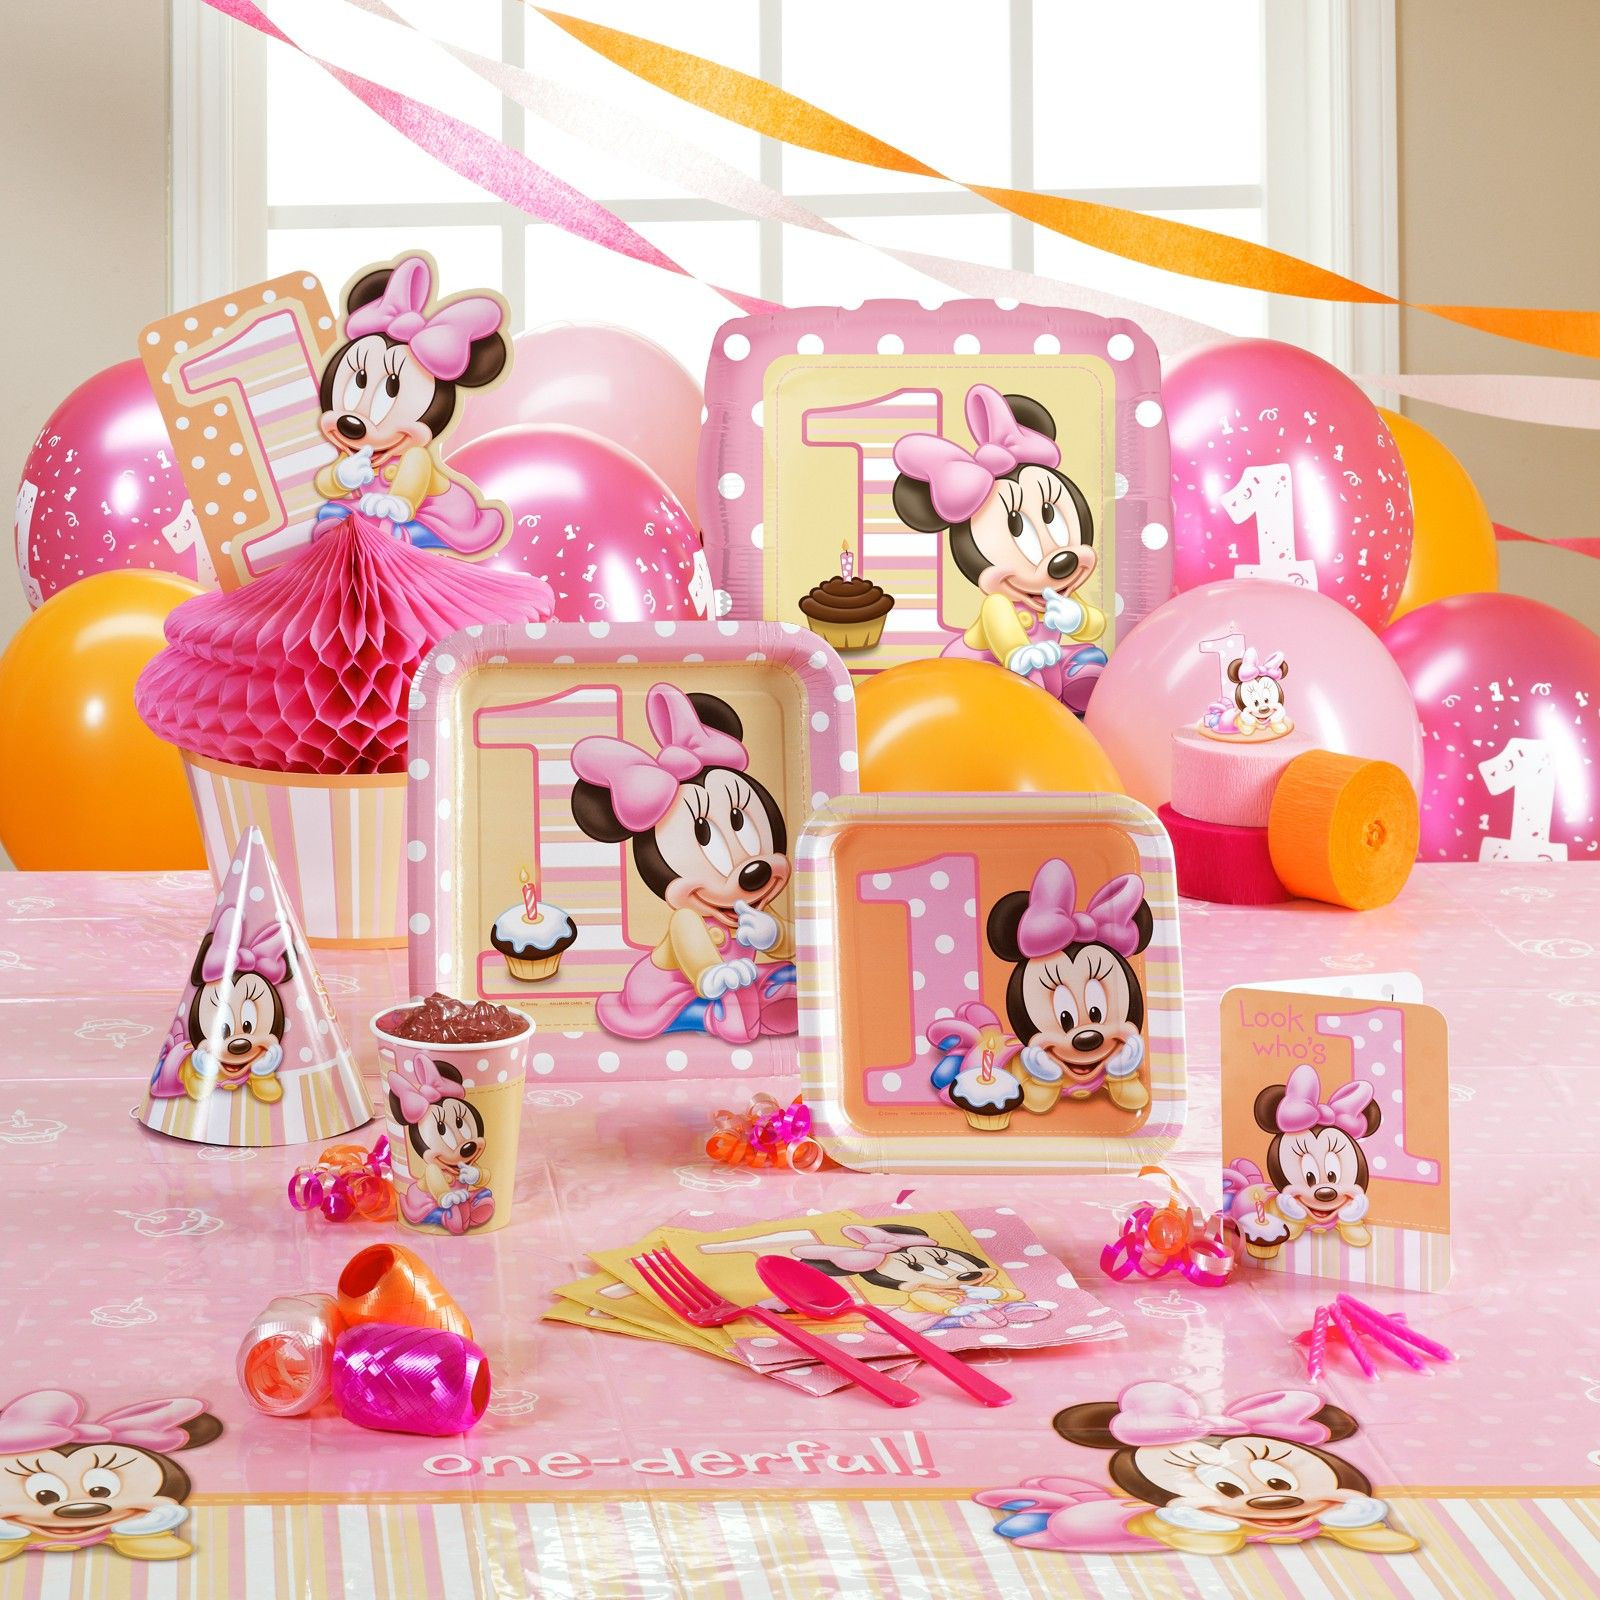 Minnie Mouse 1st Birthday Party Decorations
 Disney Minnie s 1st Birthday Party Supplies